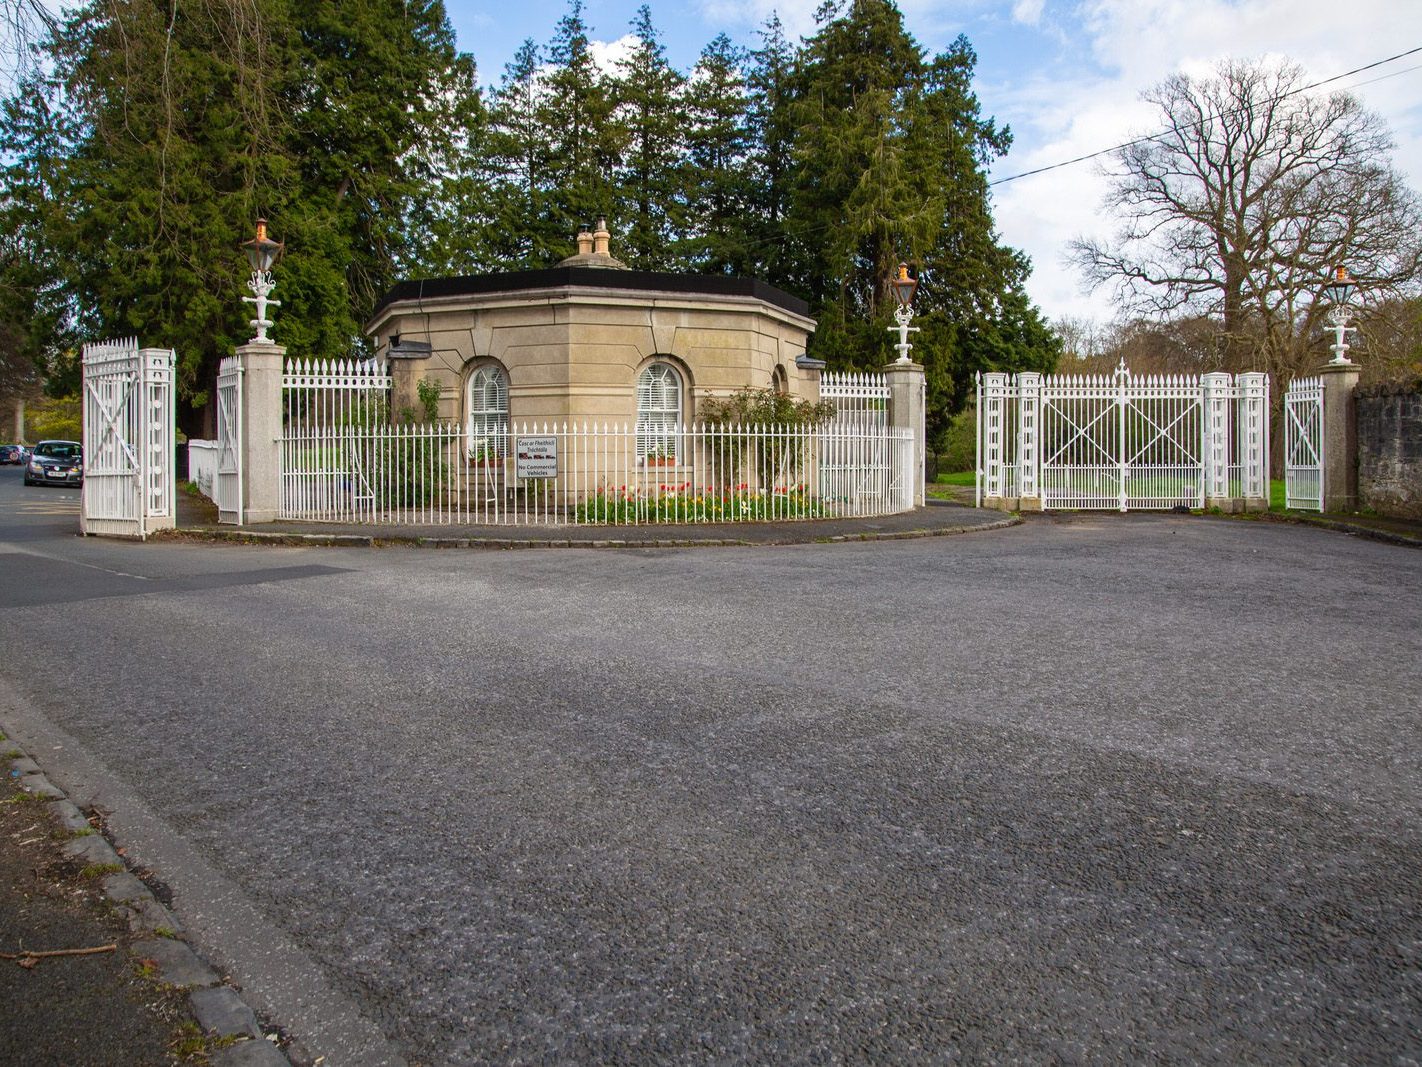 KNOCKMAROON GATE LODGE PHOENIX PARK [AND NEARBY]-223723-1